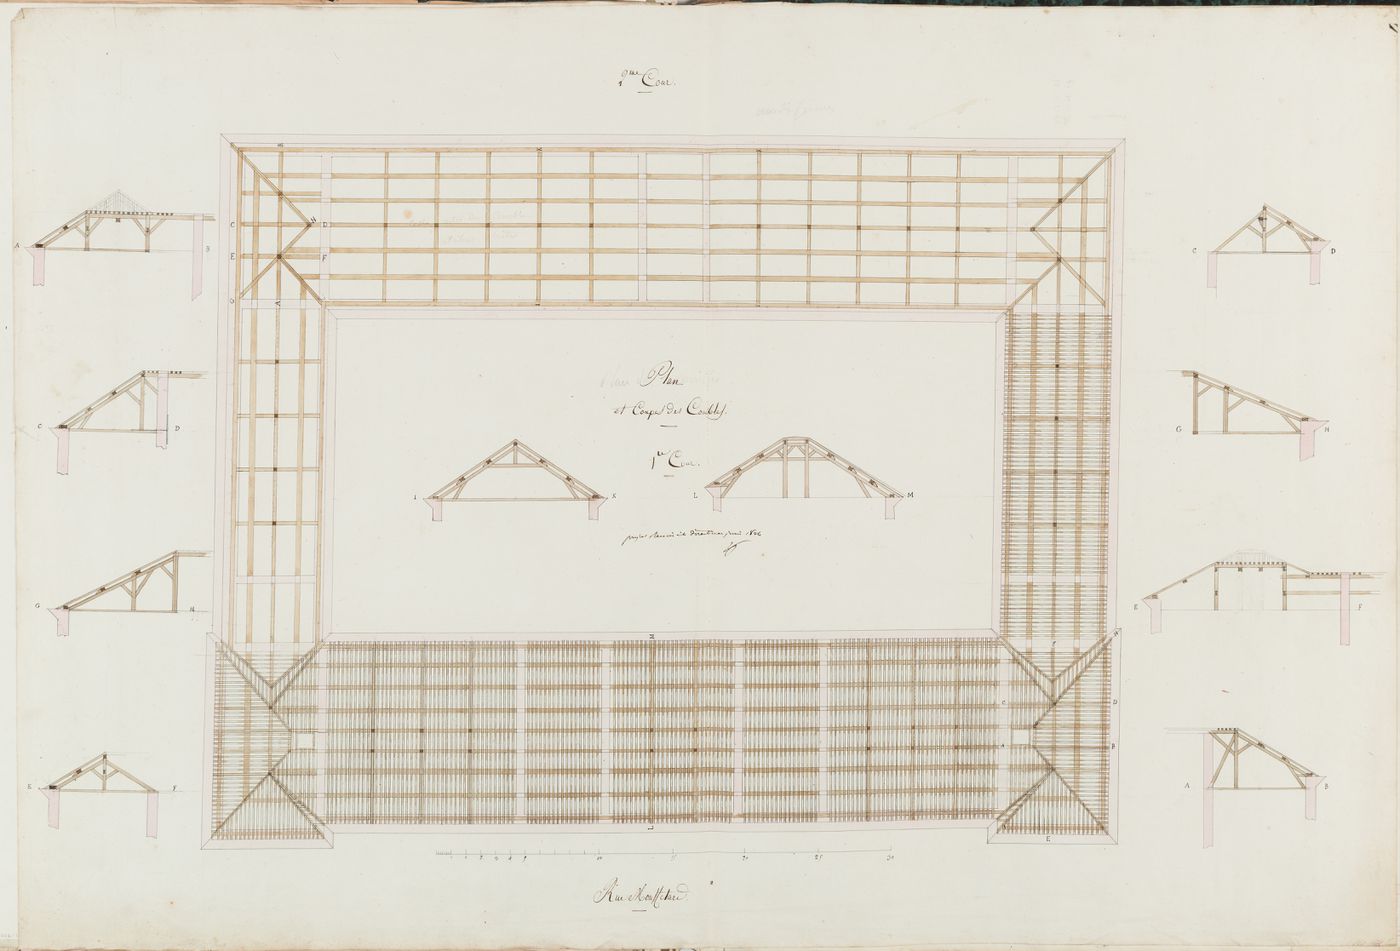 Project for the caserne de la Gendarmerie royale, rue Mouffetard: Cutaway plan and sections showing the roof trusses for the buildings surrounding the first courtyard